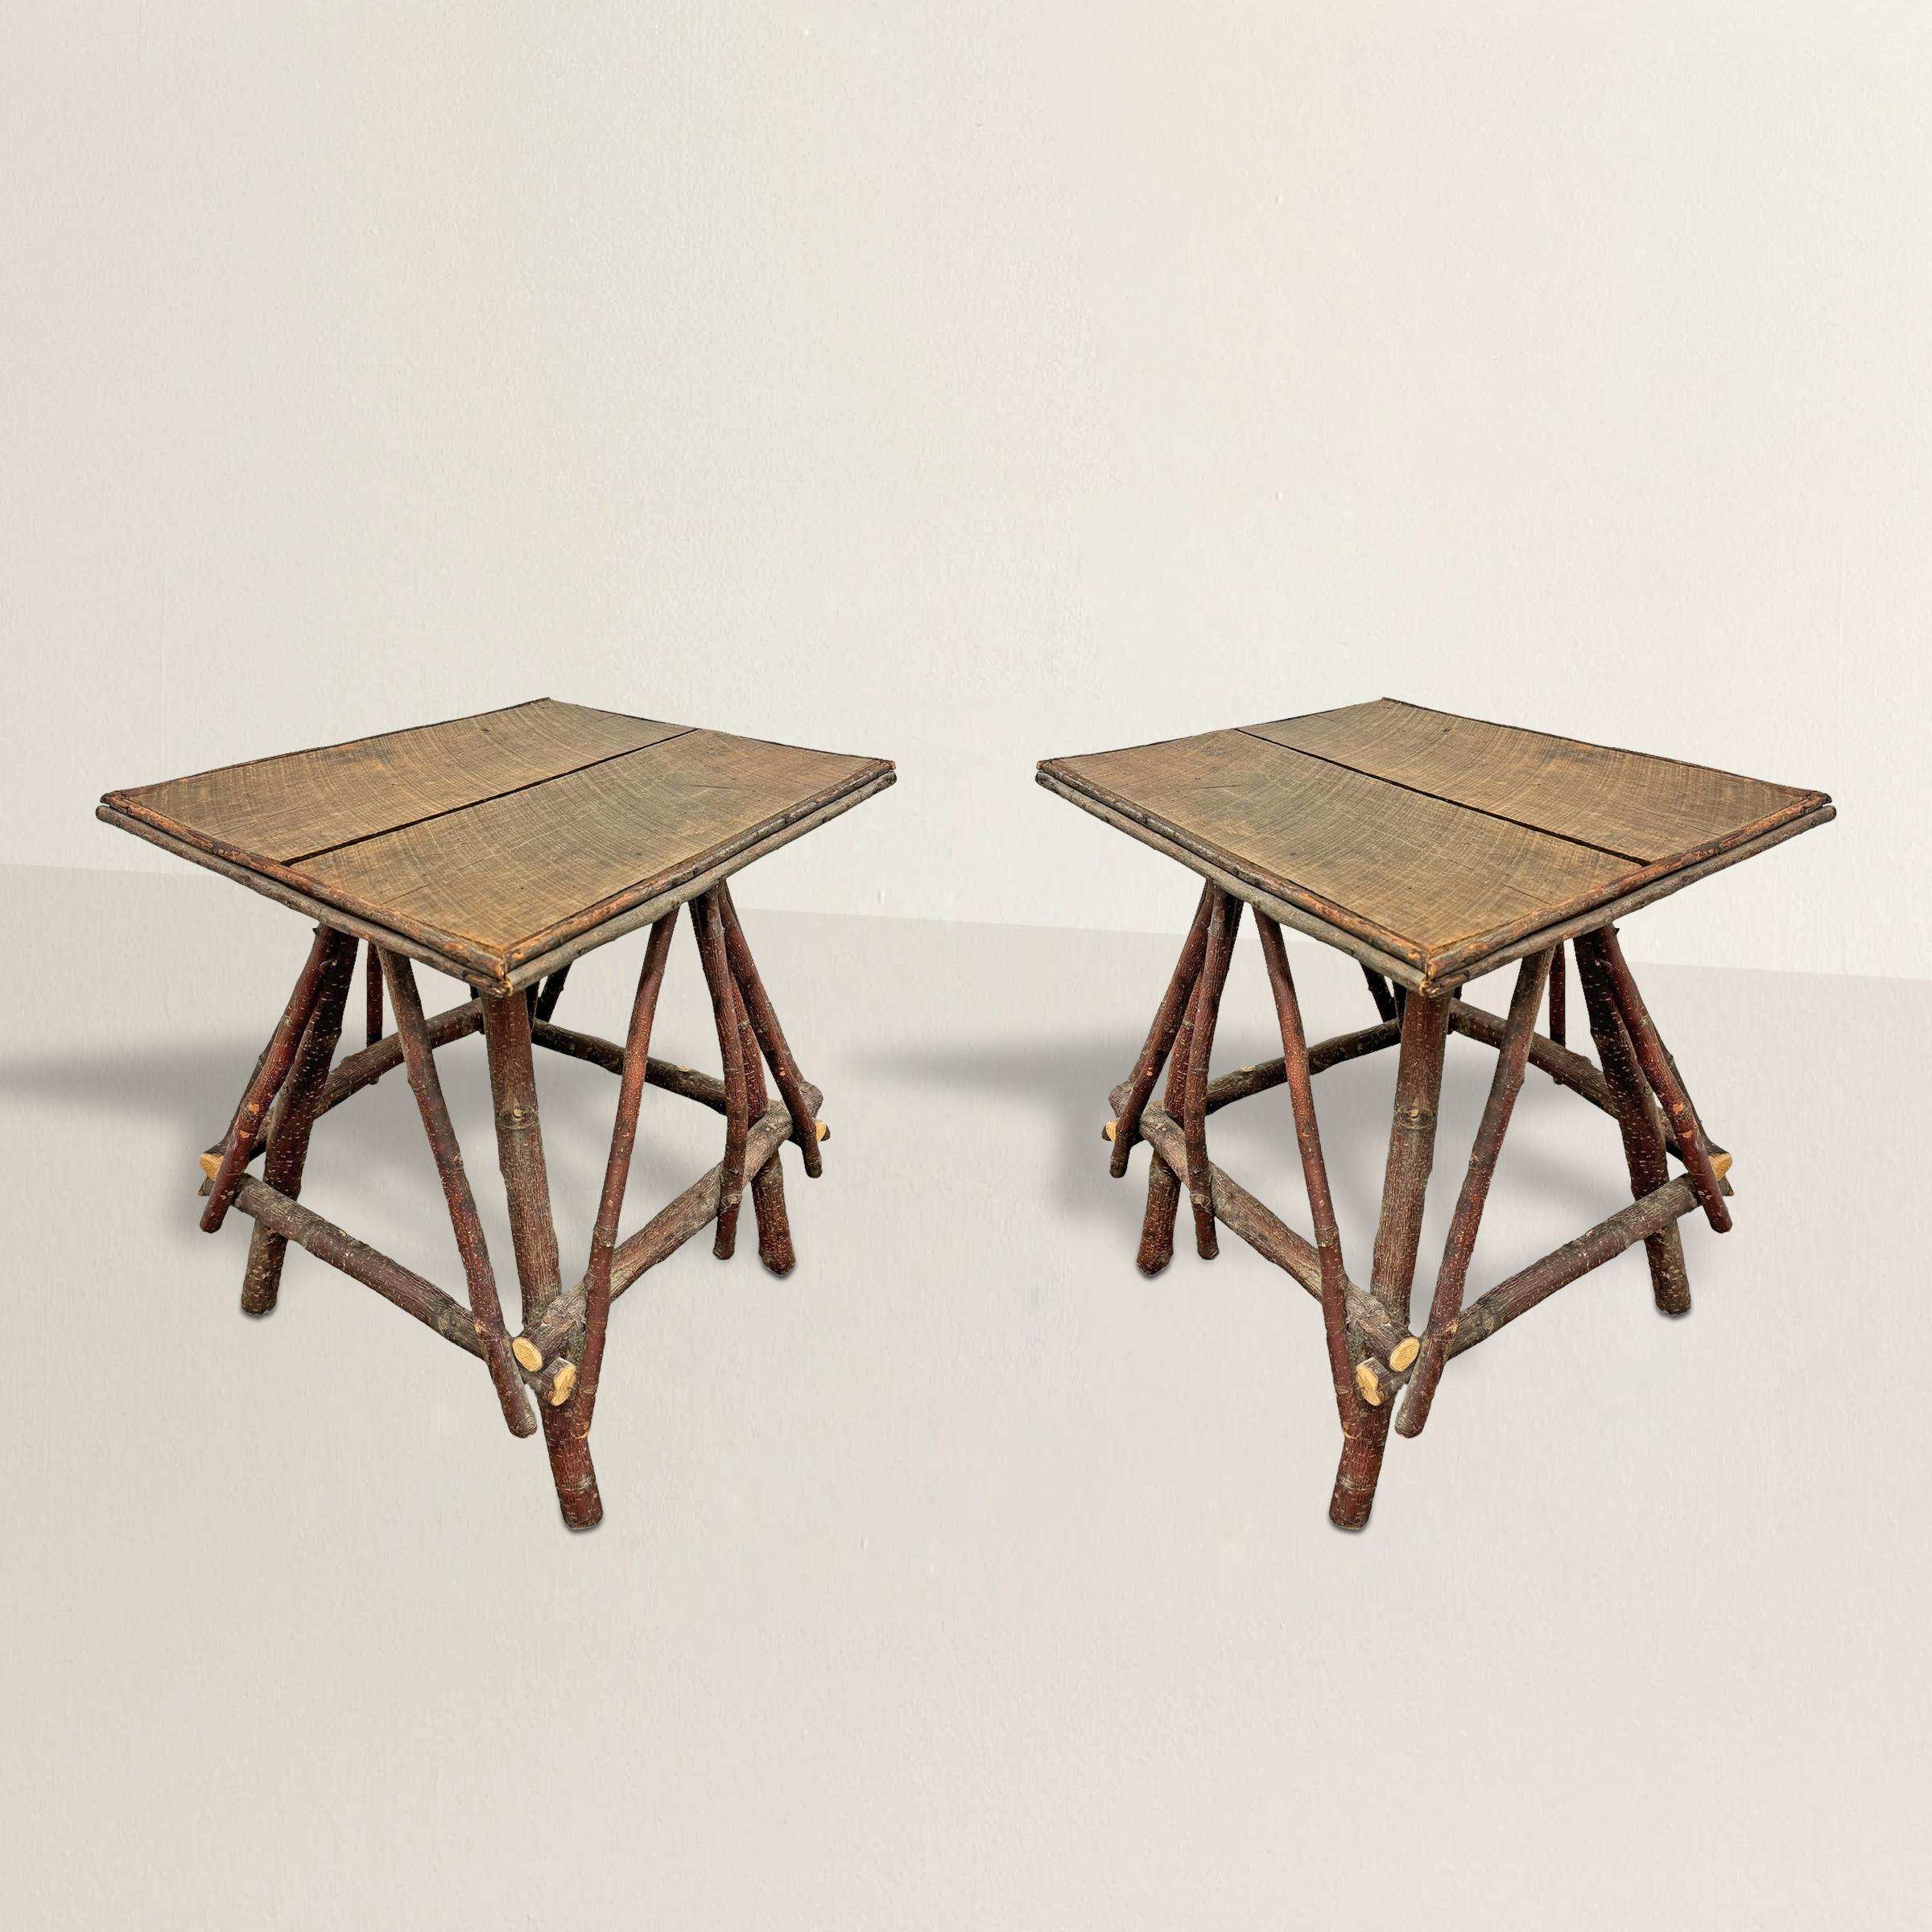 This pair of 21st-century American tables breathes new life into the Adirondack style, merging the timeless appeal of rustic design with contemporary craftsmanship. Constructed with bases of found twigs, arranged with an eye for architectural